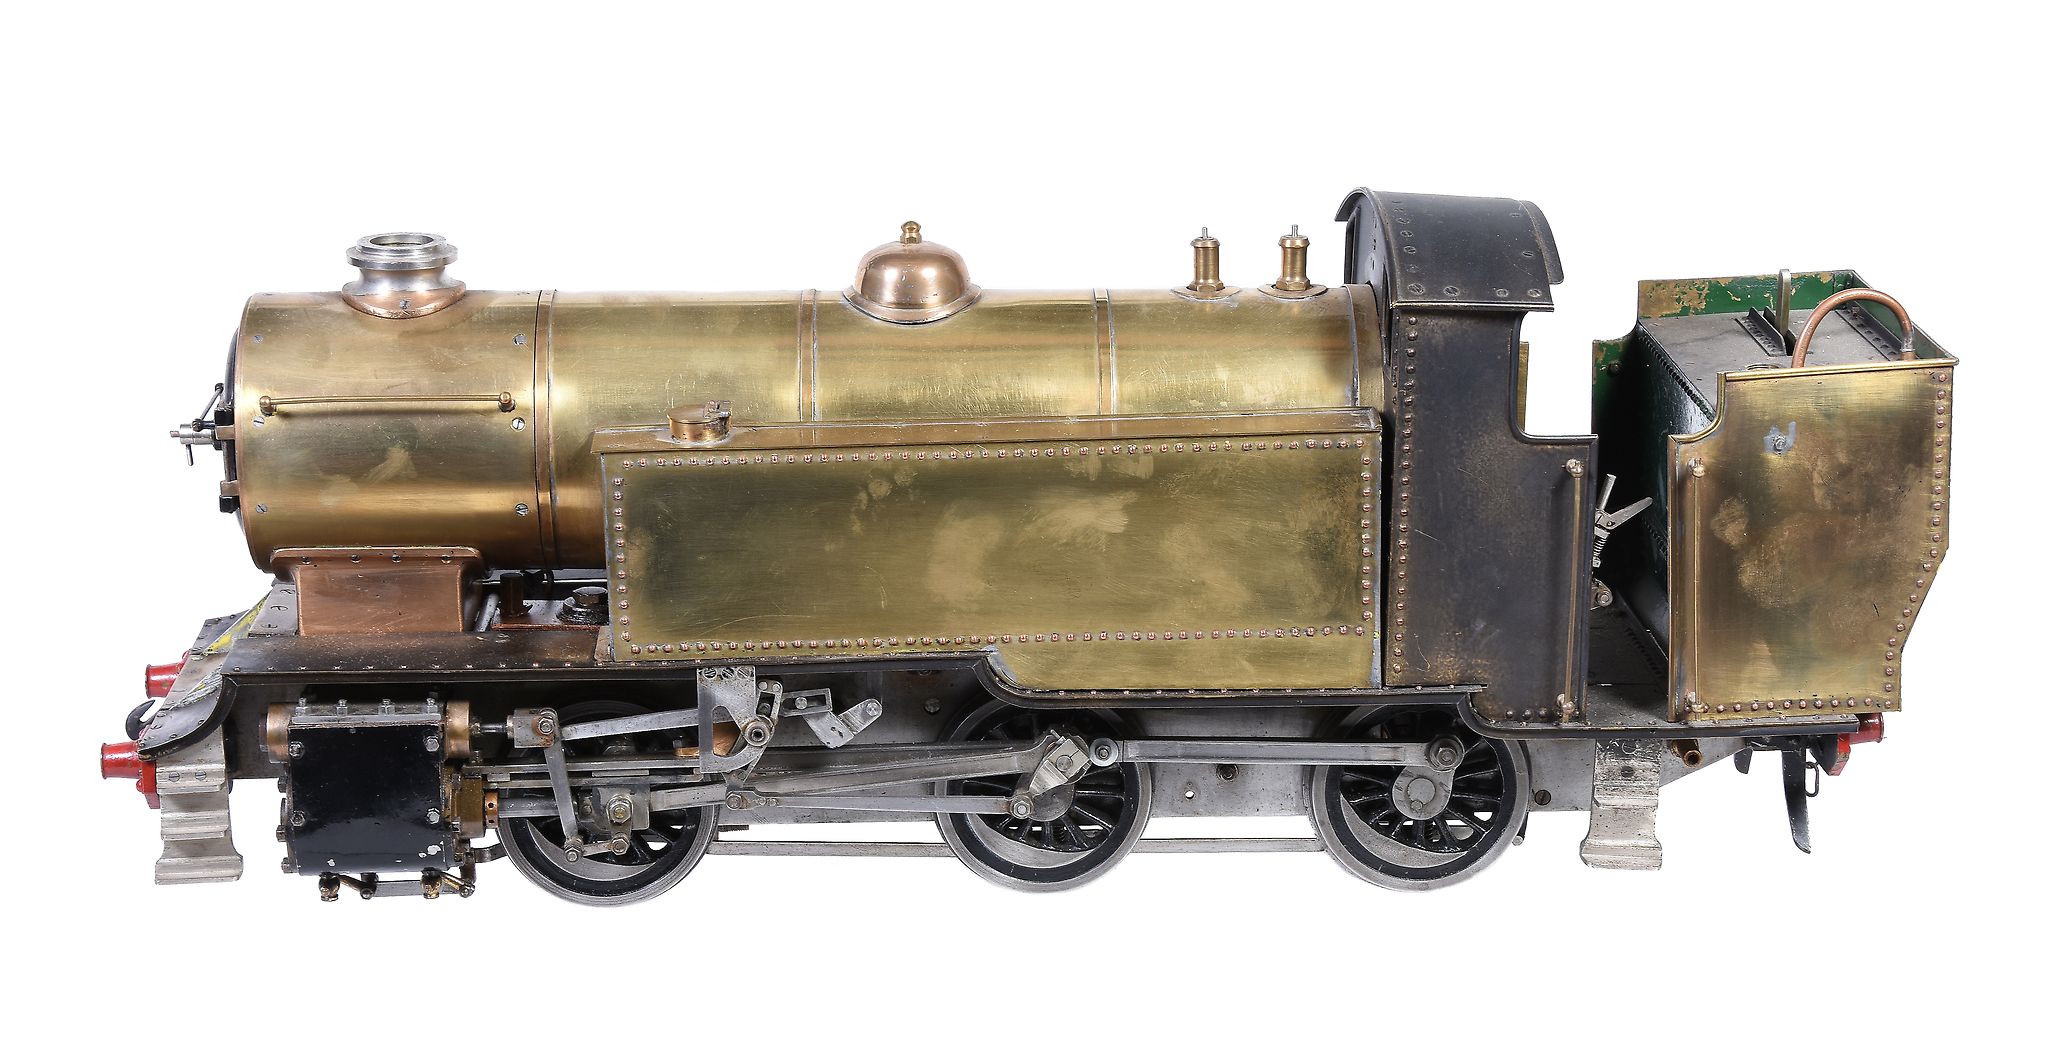 A well engineered 3 1/2 inch gauge model of a 0-6-0 side tank locomotive, built to the Bassett